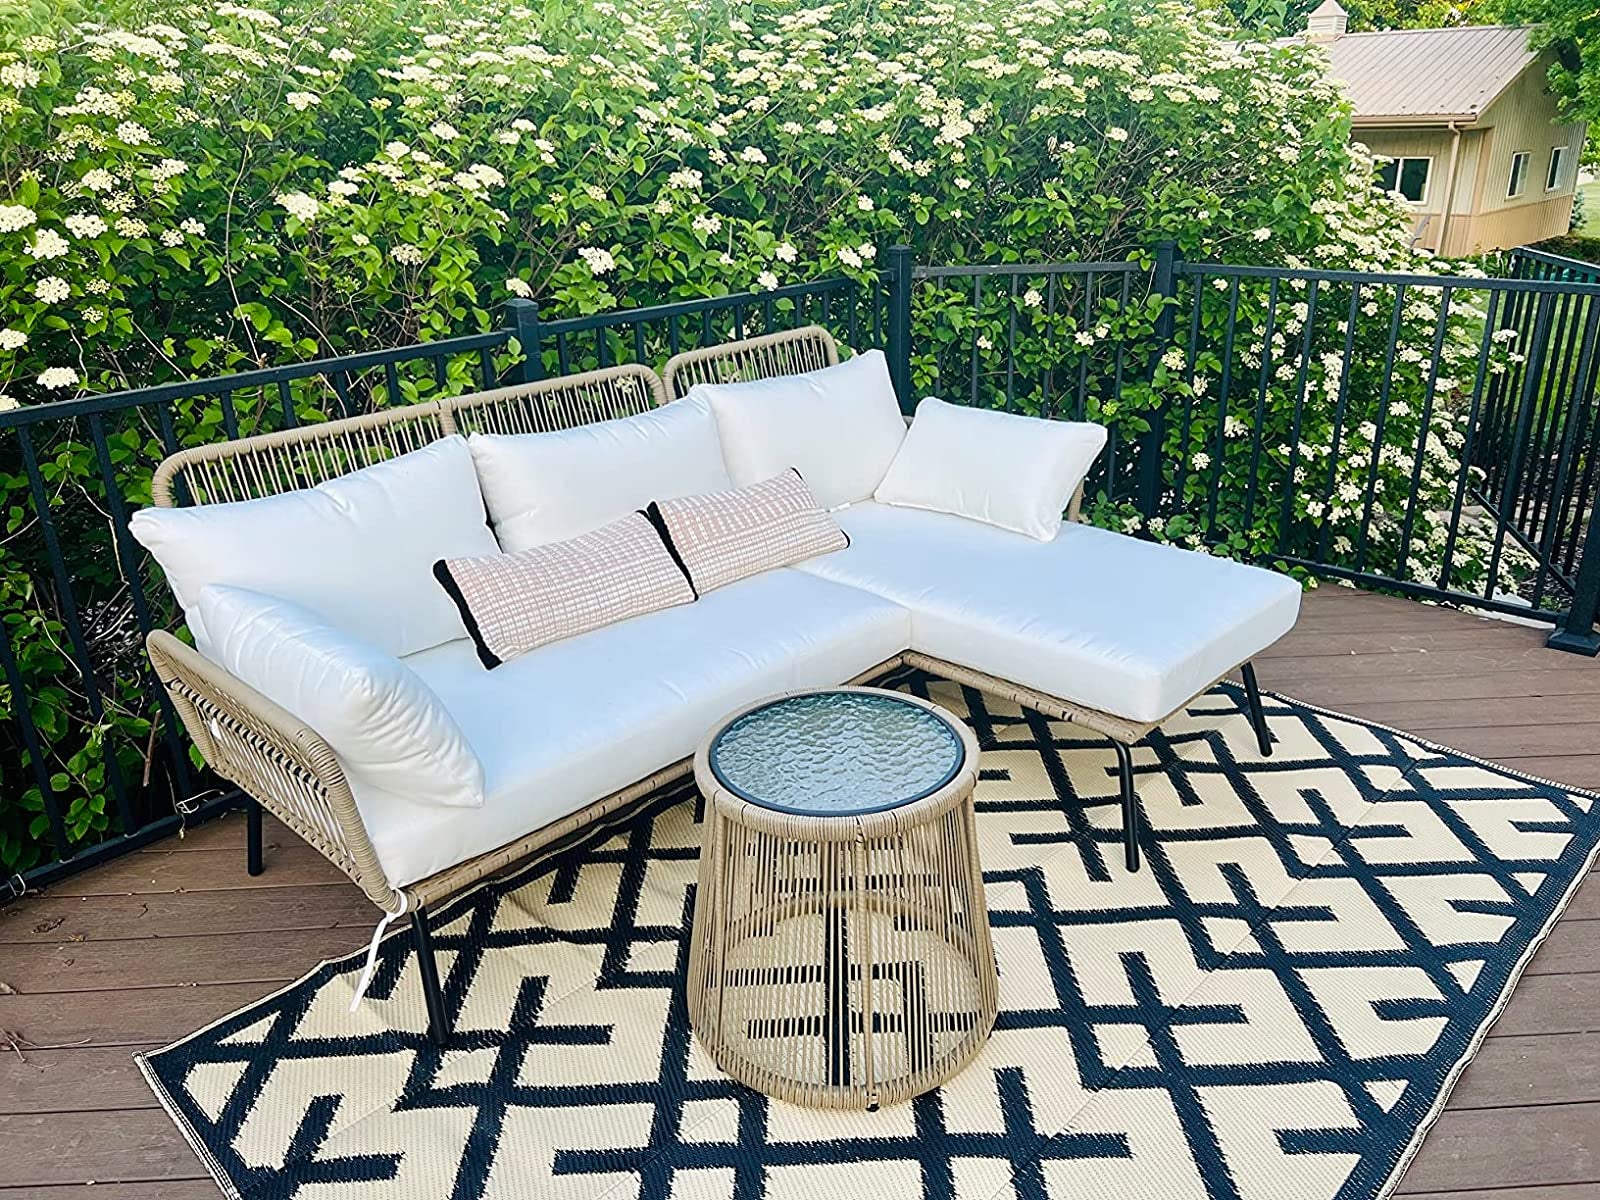 Let's Take This Outside! Pro Patio Ideas You'll Love - Chairish Blog